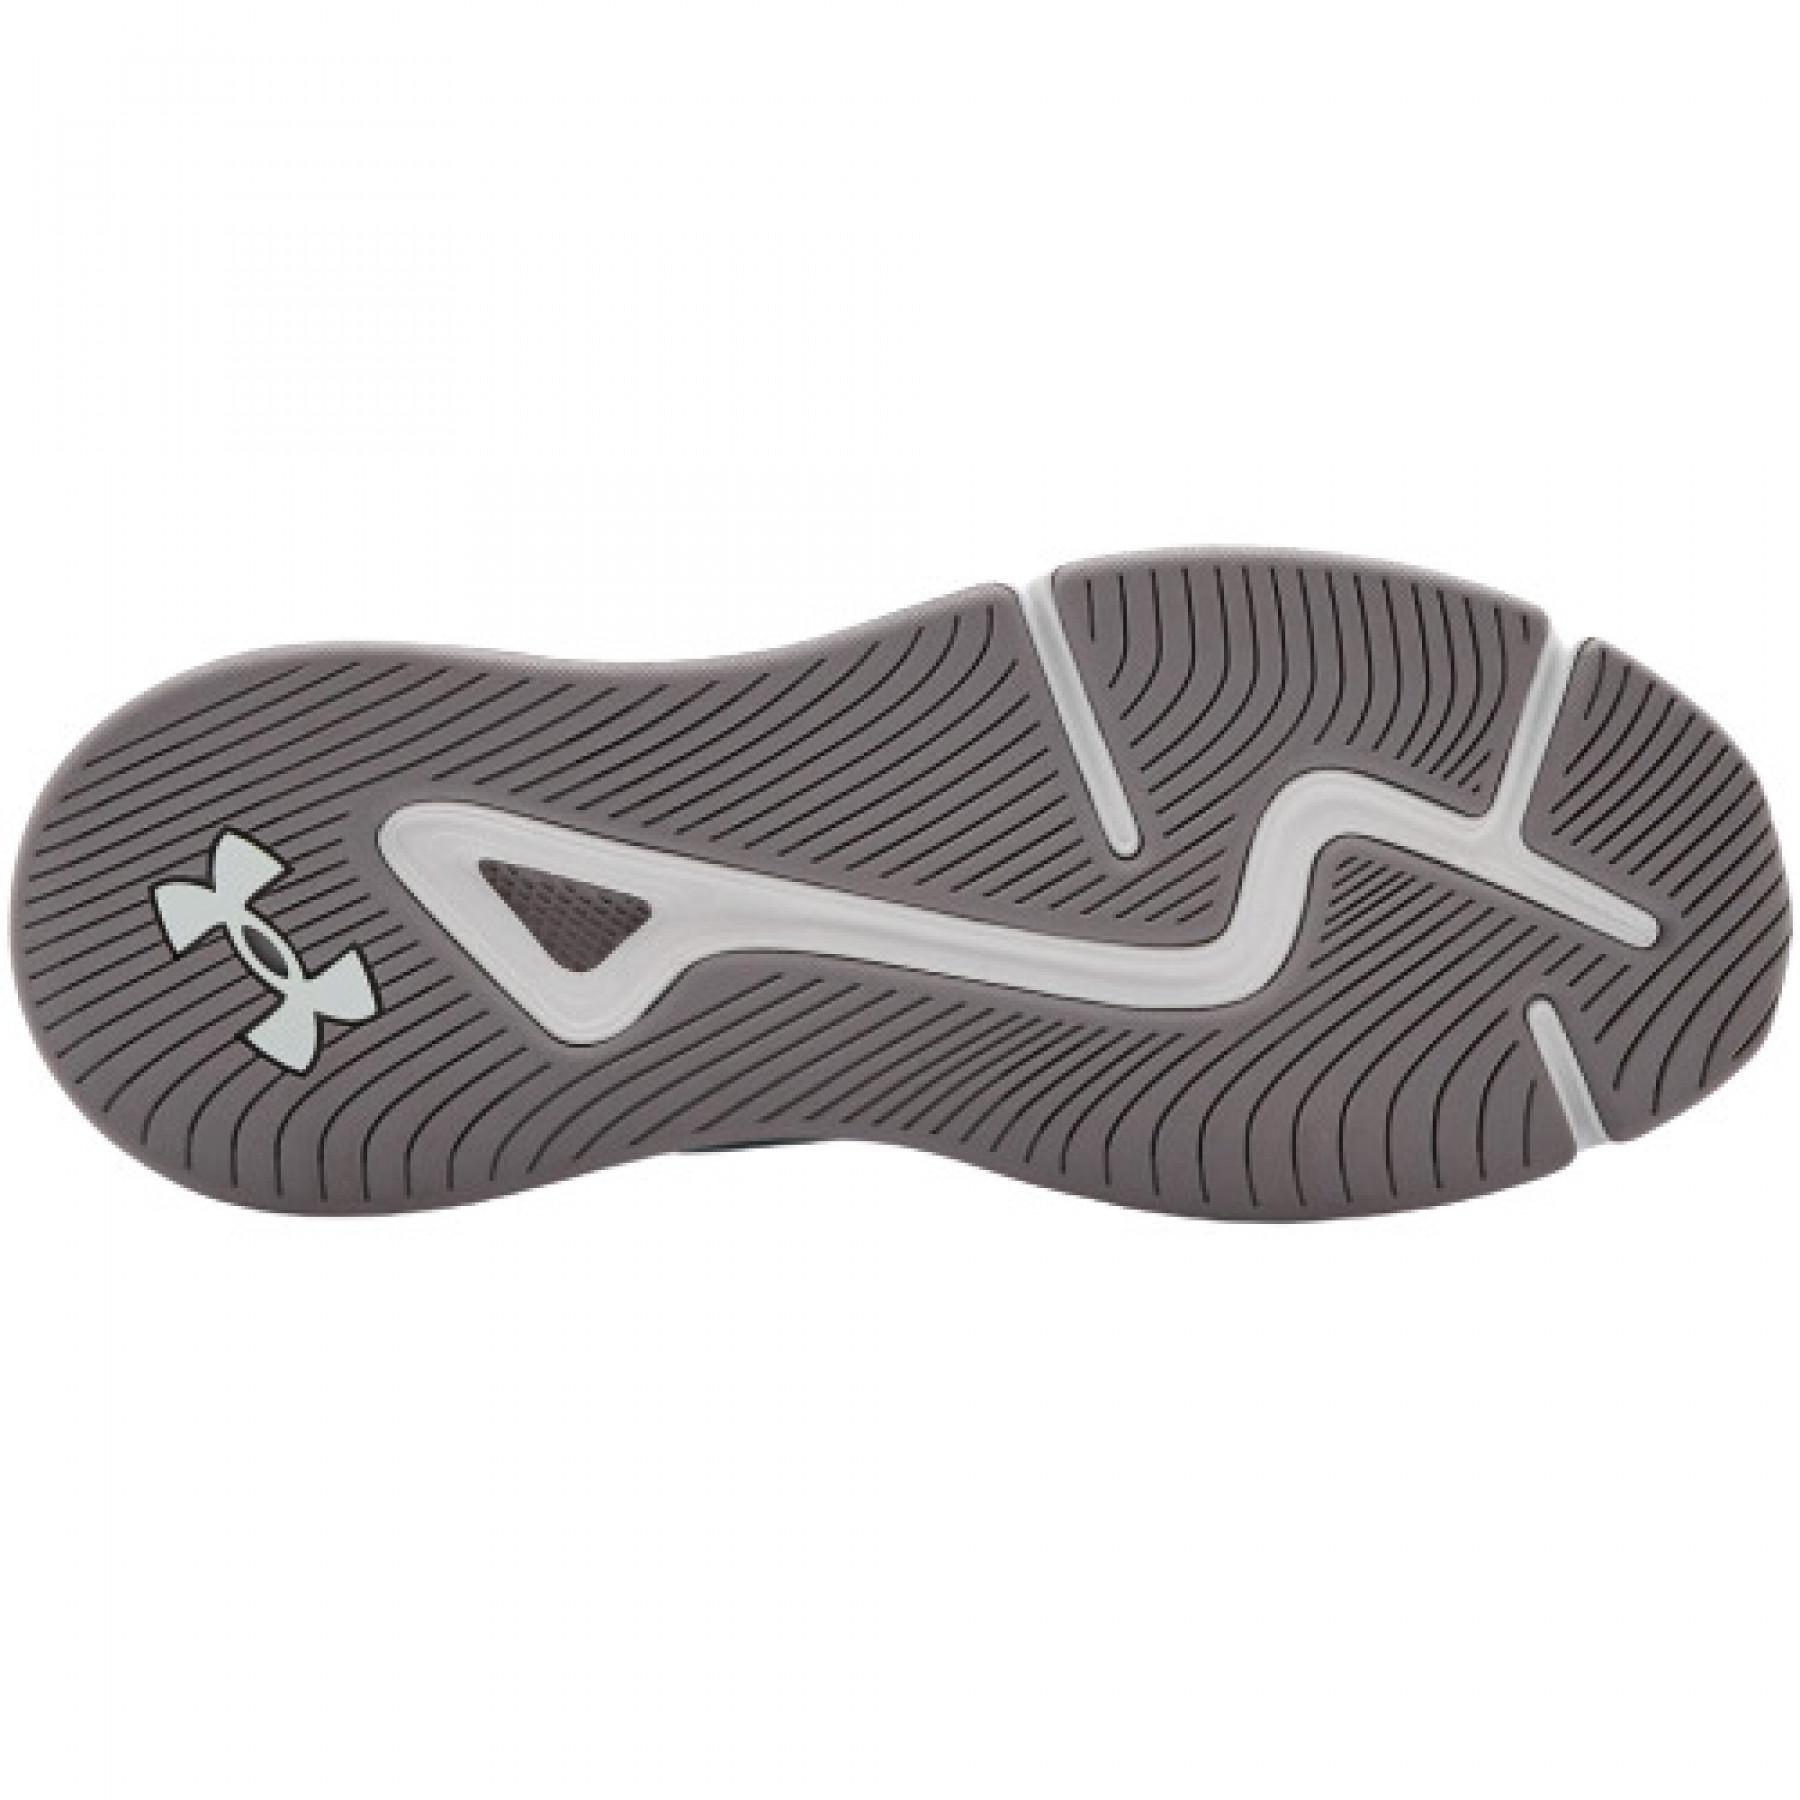 Baskets femme Under Armour Charged RC